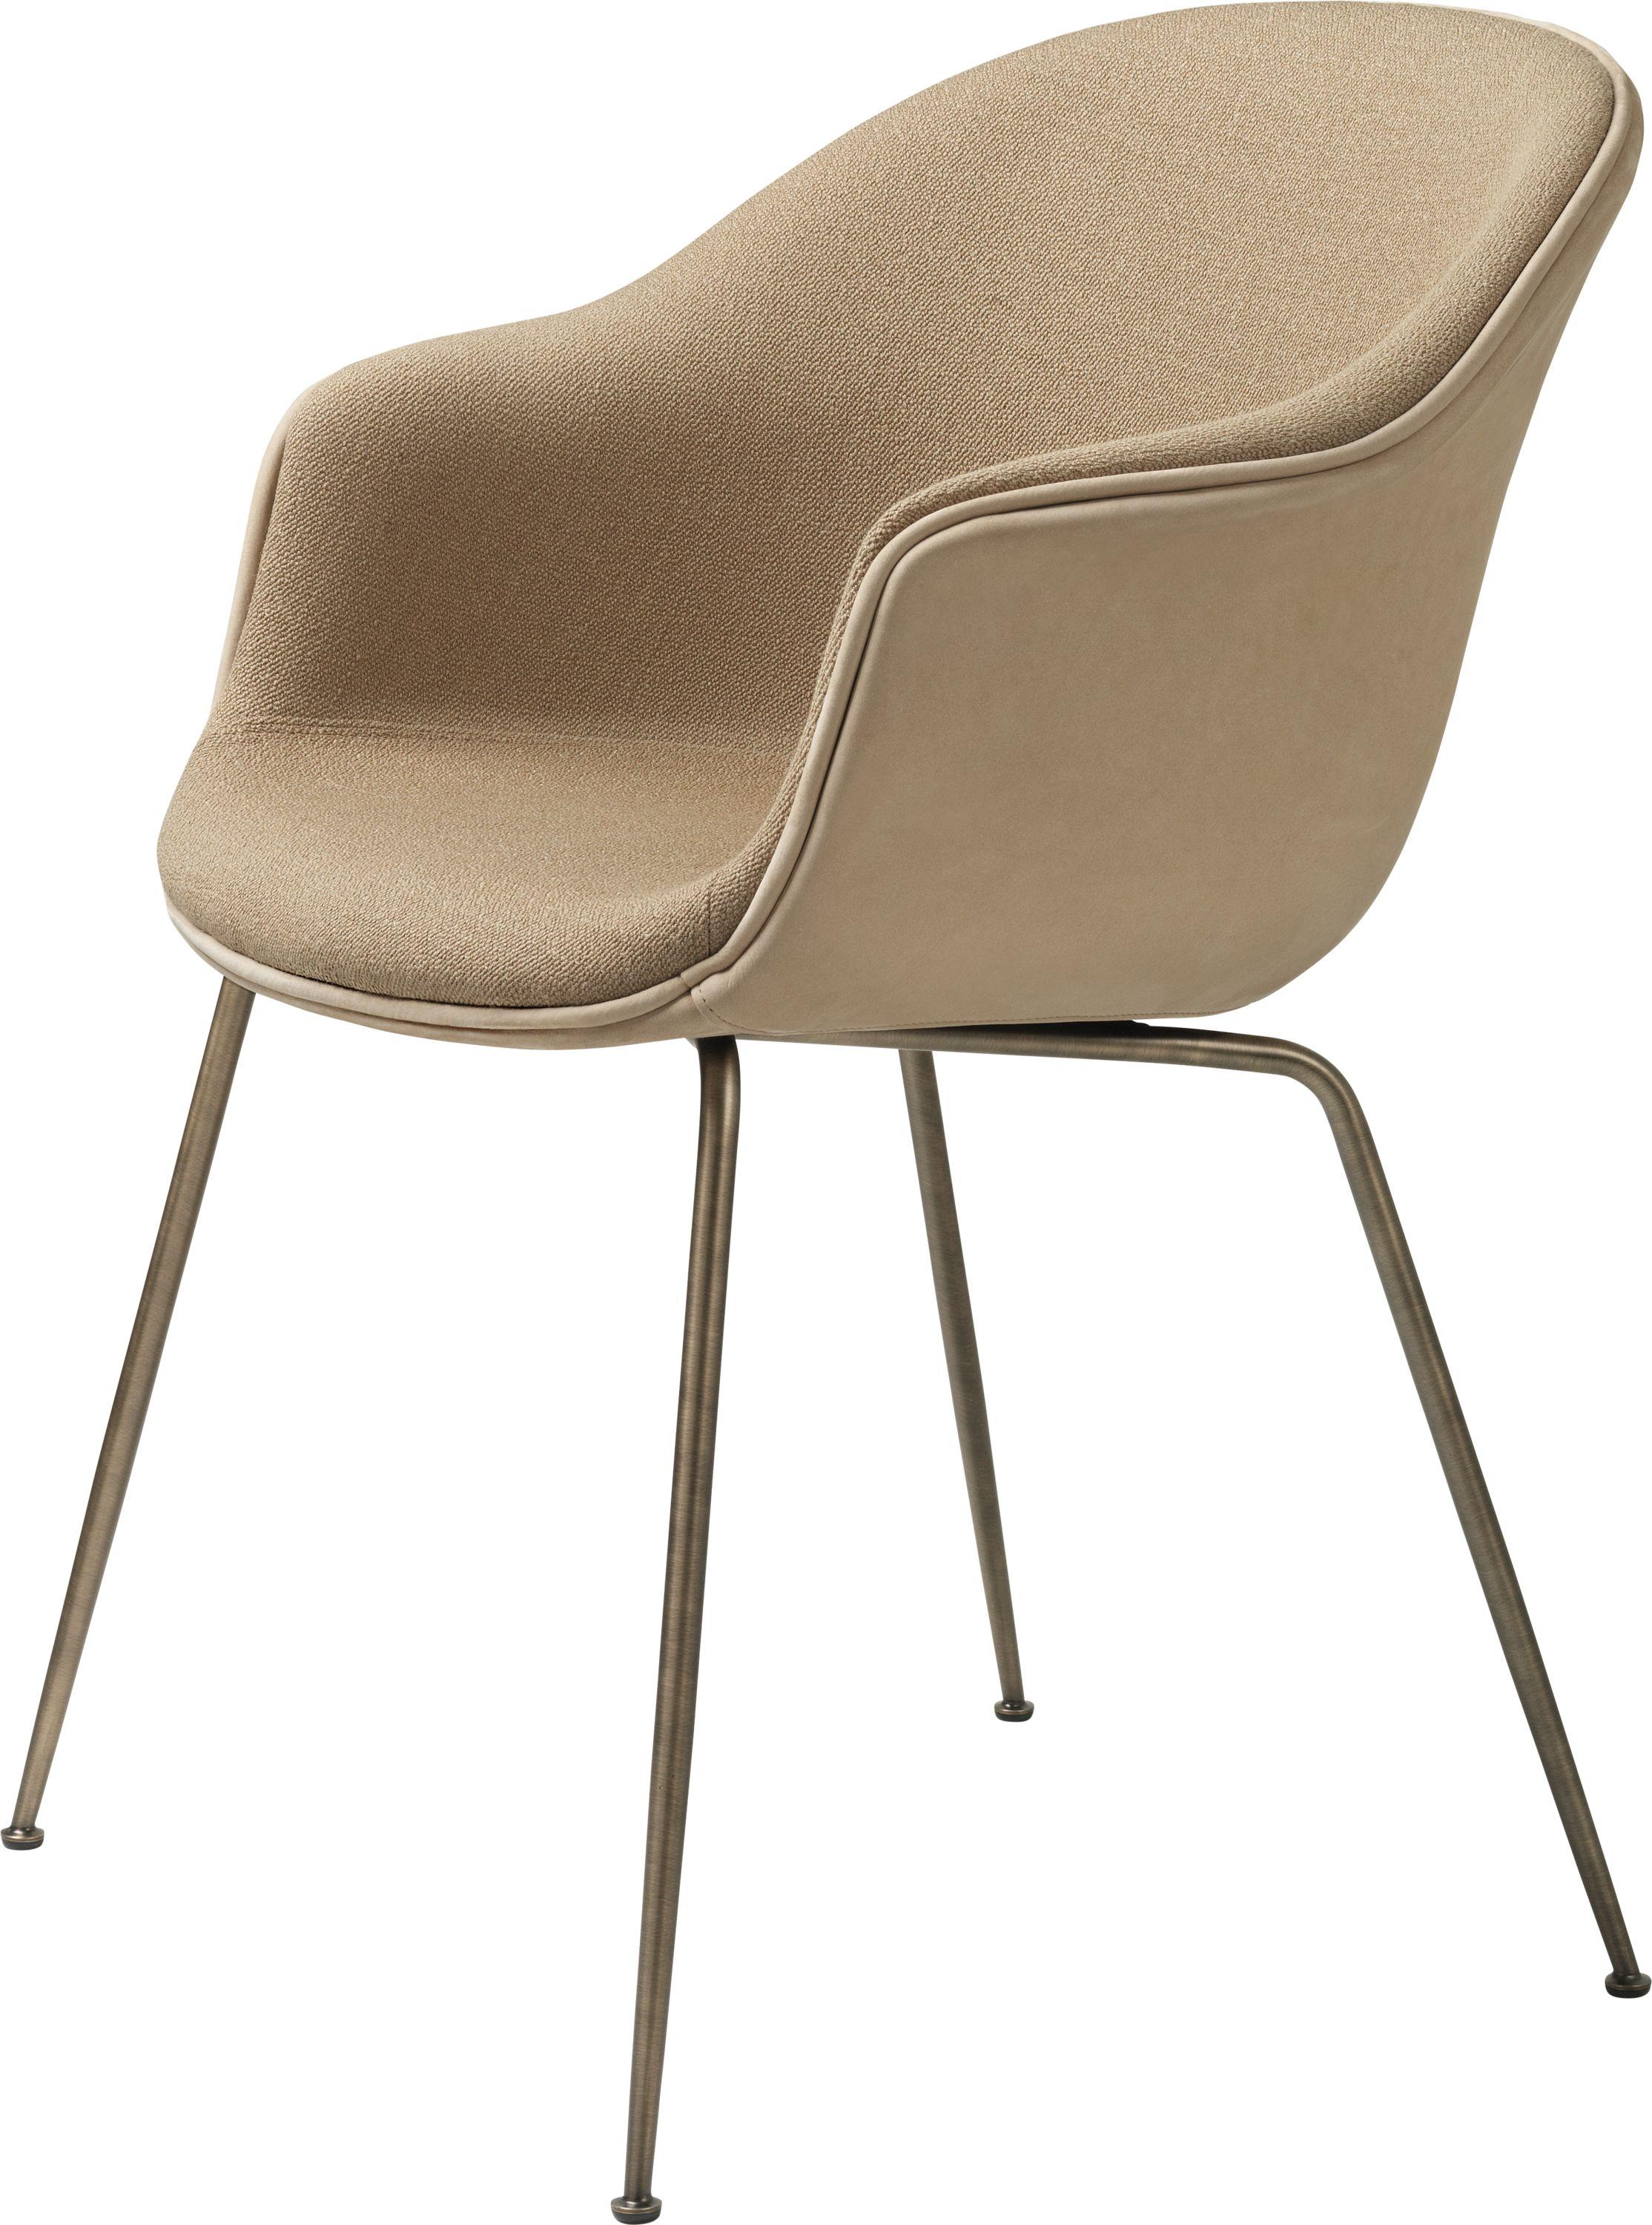 GamFratesi 'Bat' Dining Chair in Brown and White with Antique Brass Conic Base 14